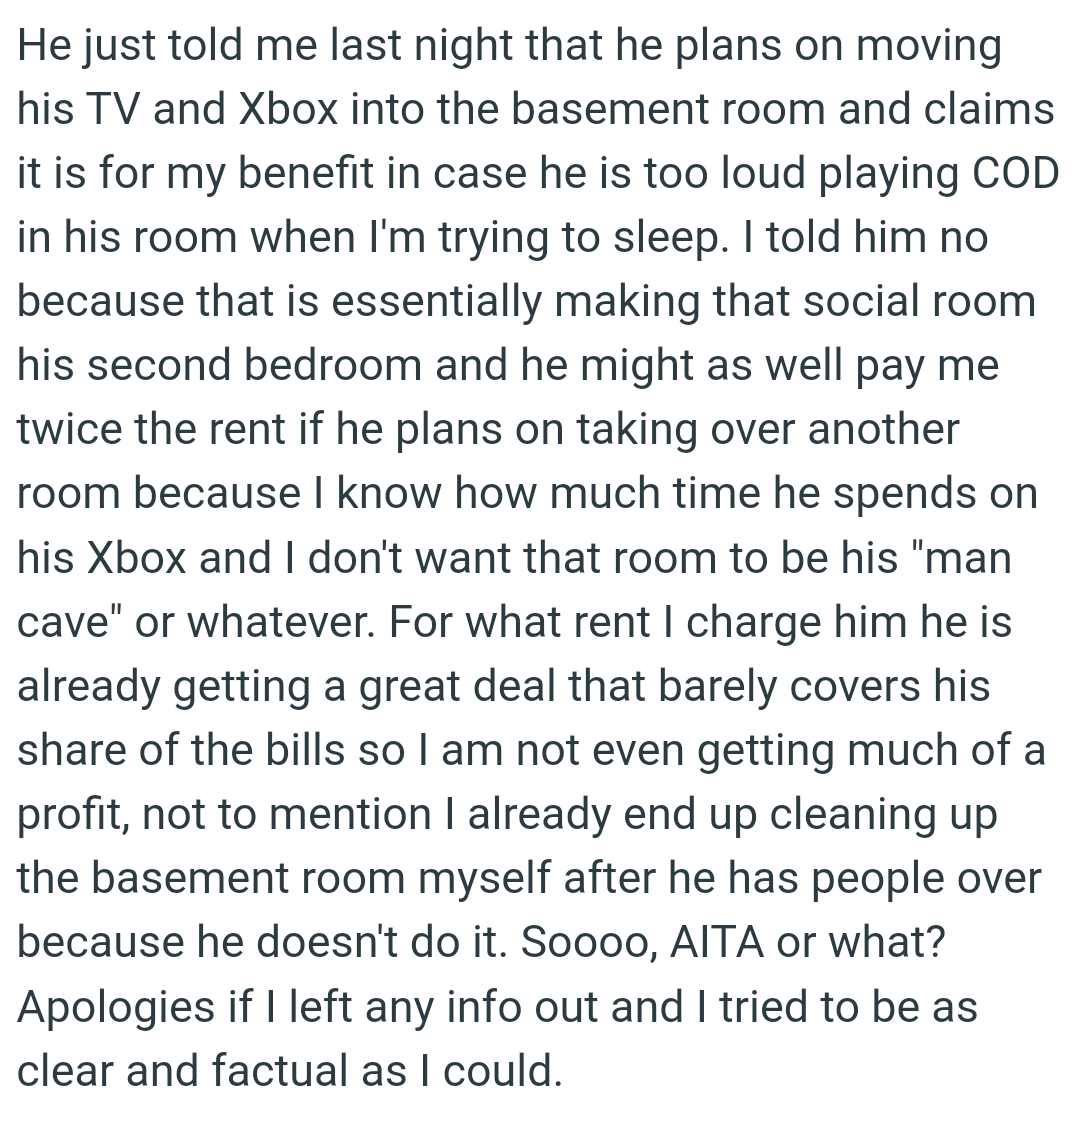 The OP doesn't want that room to be his 